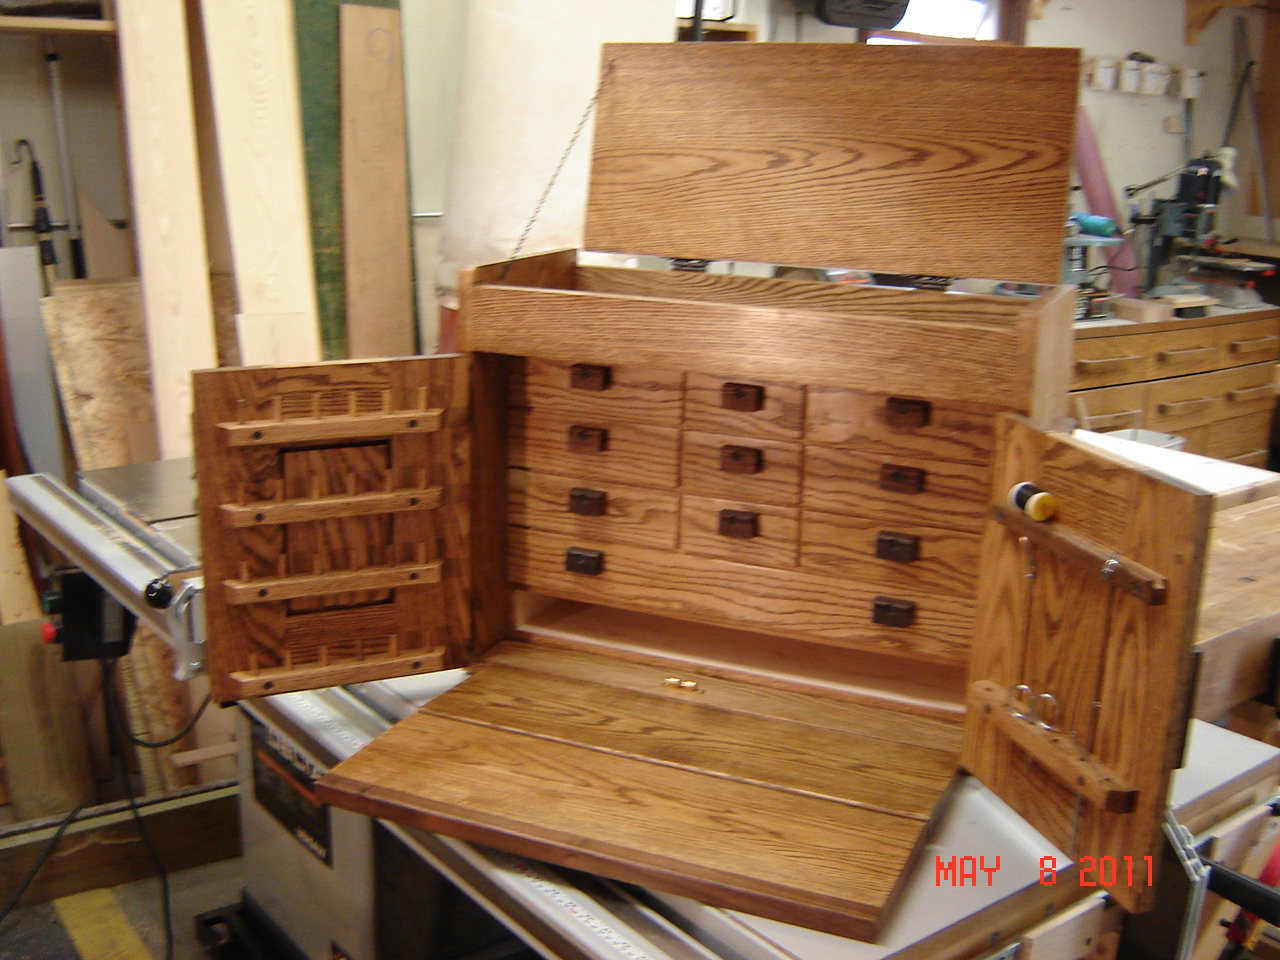 Ray's Fly Tying Cabinet - The Wood Whisperer